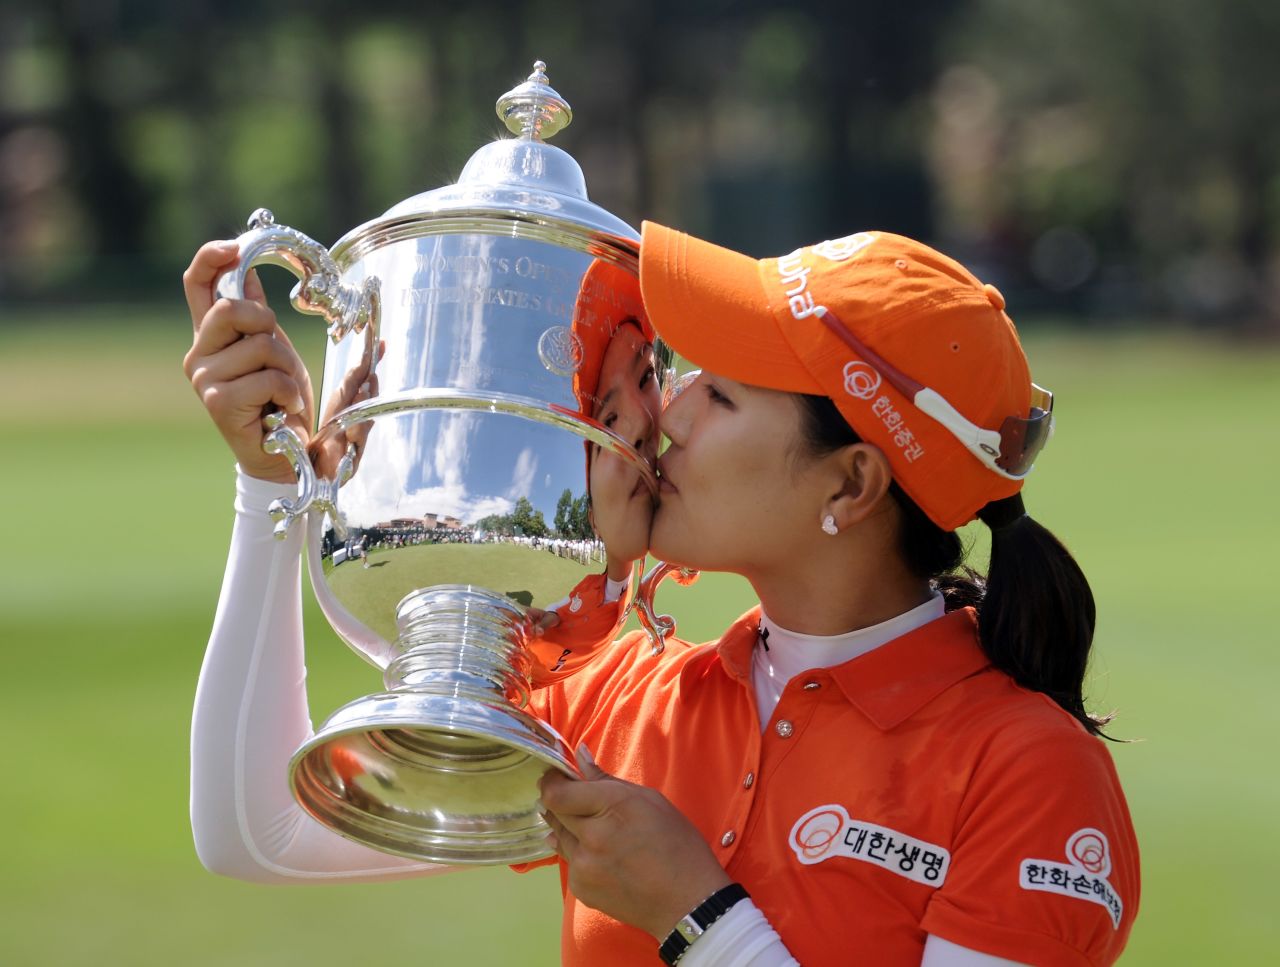 In 2011 she became the fifth South Korean to win the tournament when she beat compatriot Hee Kyung Seo in a three-hole playoff in Colorado.